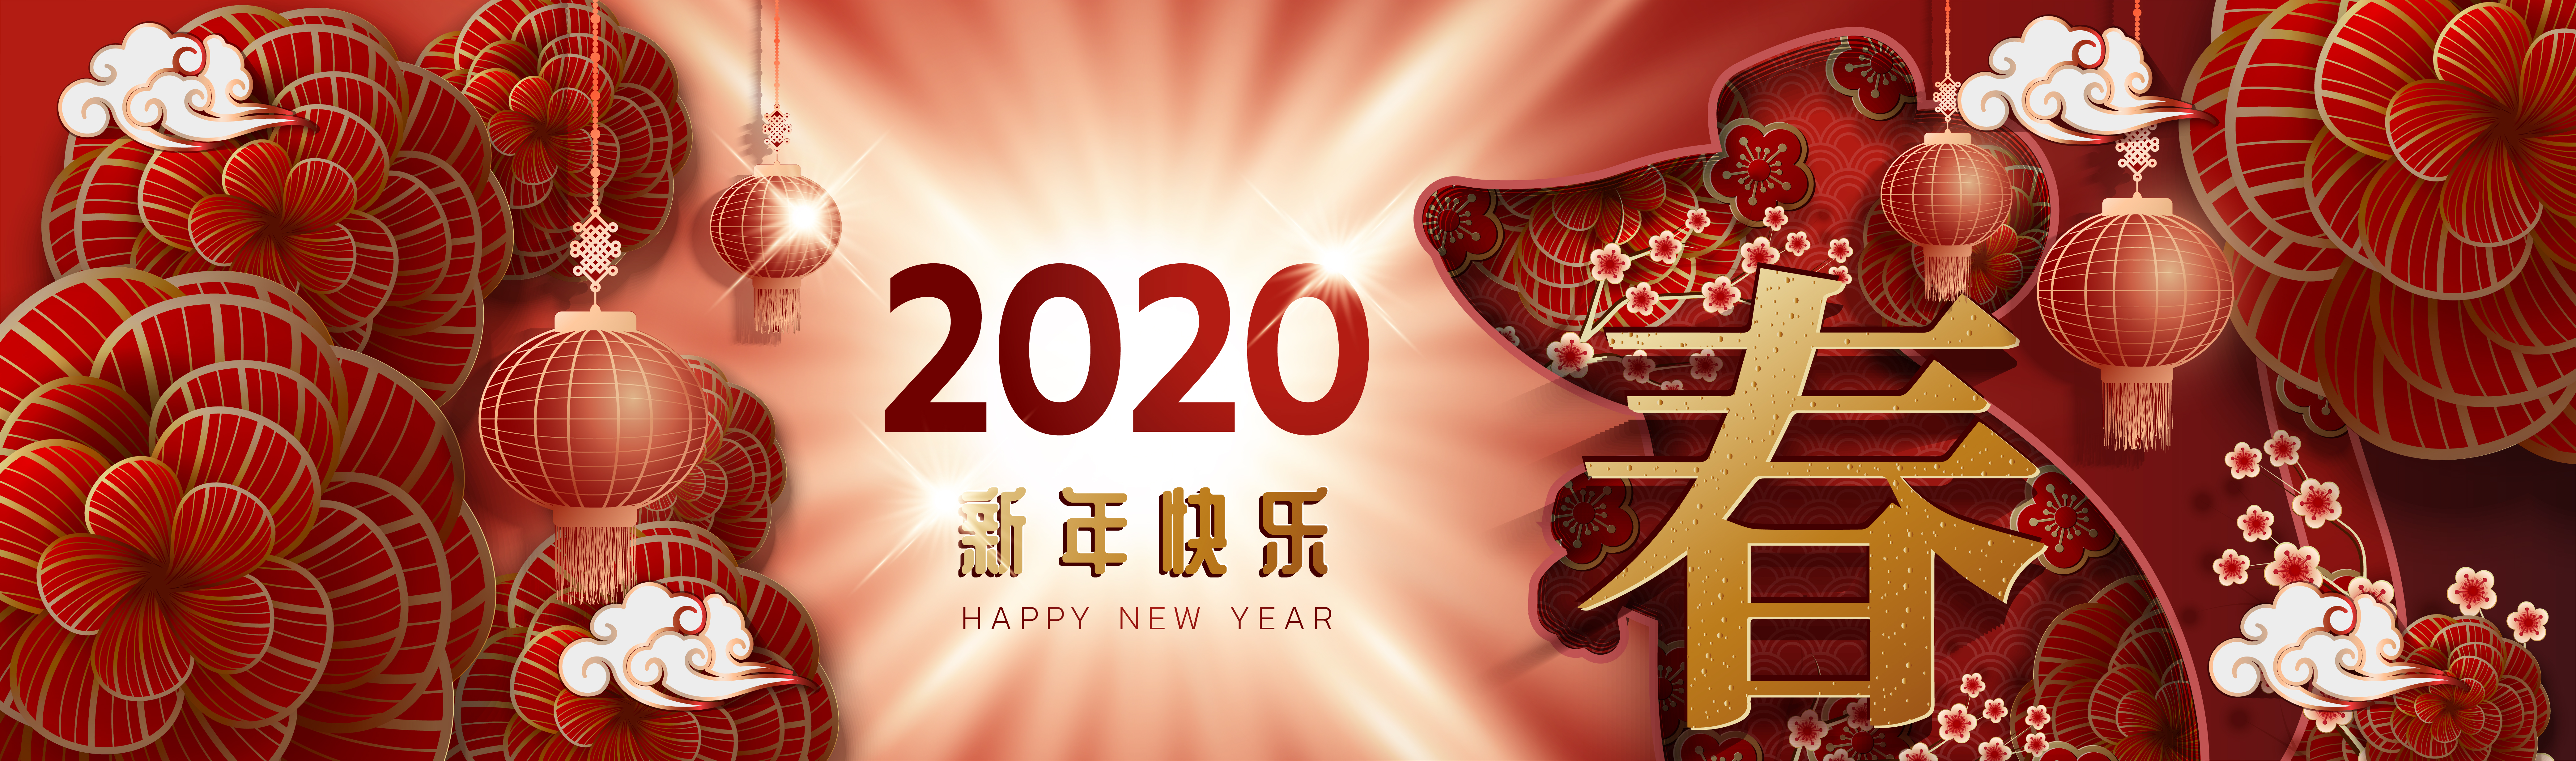 Happy New Year 2020 Hd Images Quotes Status Latest